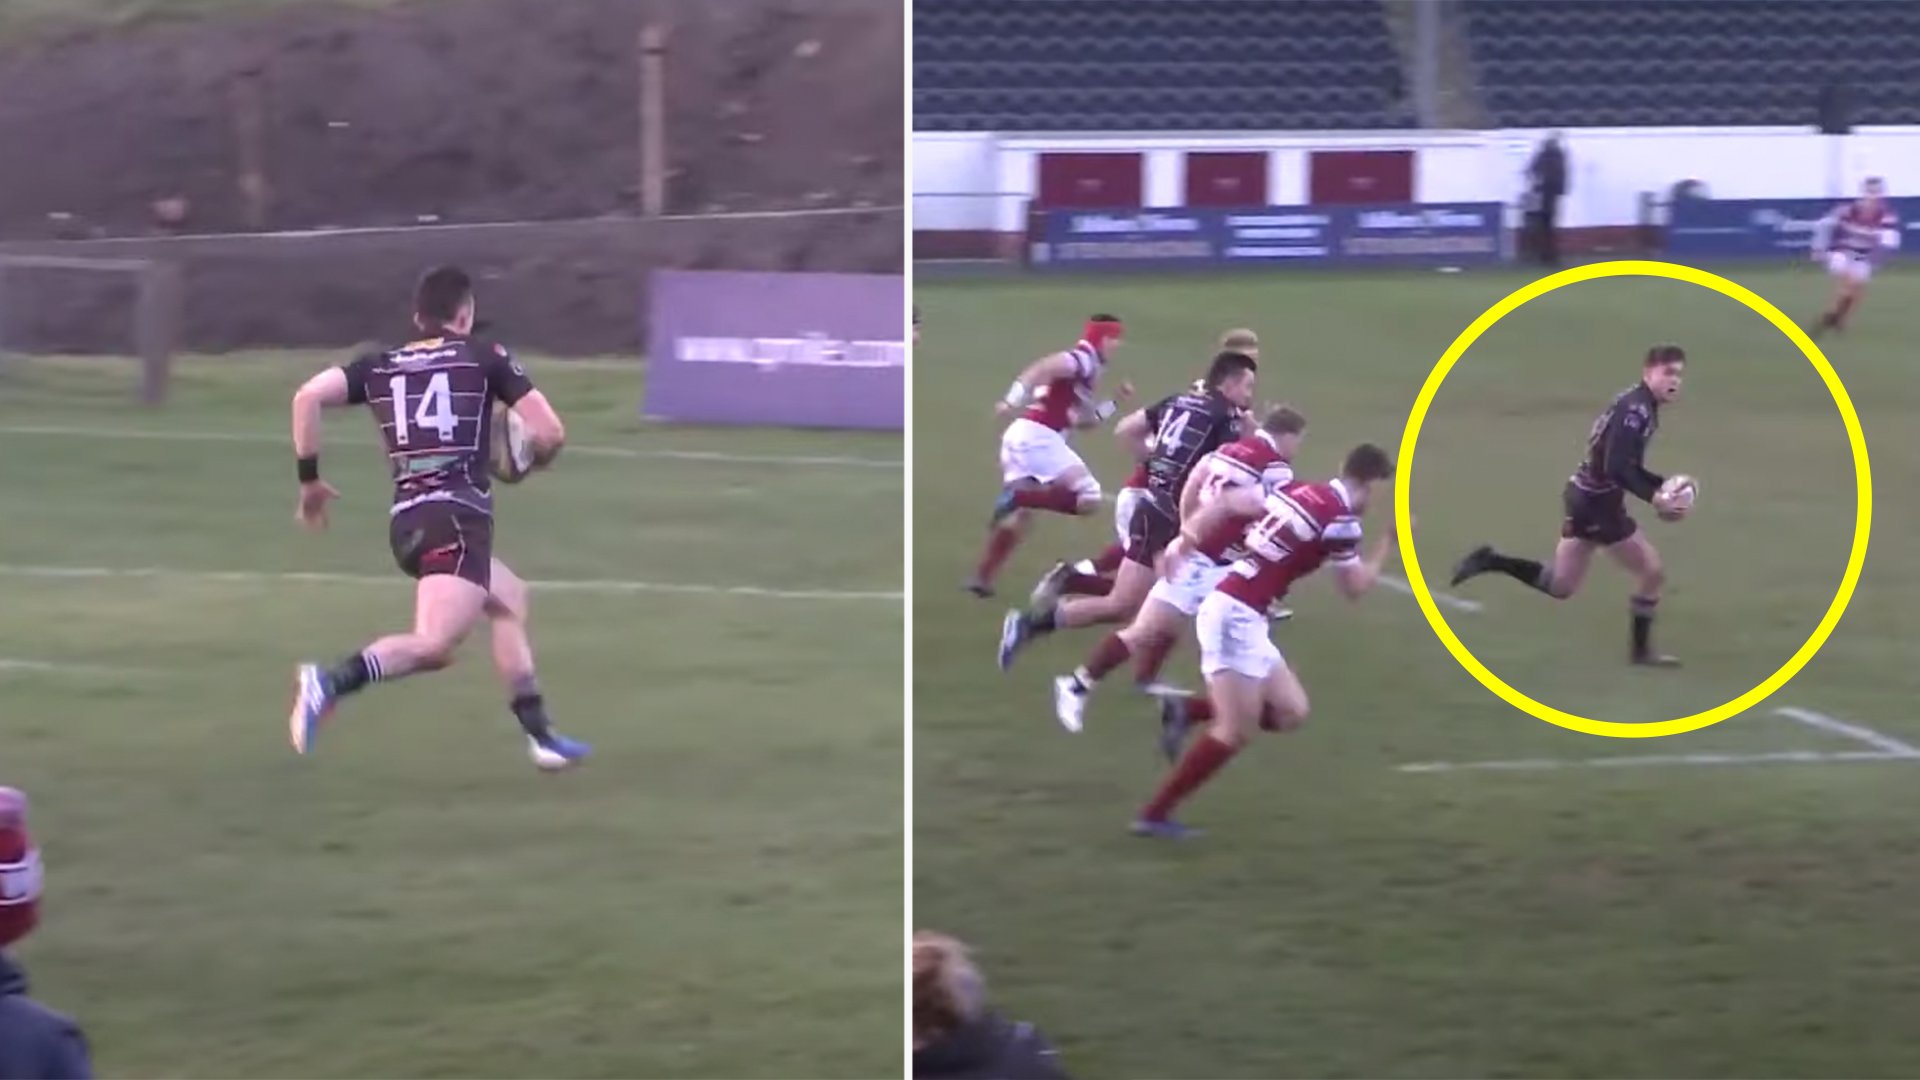 We're blown away by Scottish youngster Ollie Smith and his incredible highlight reel